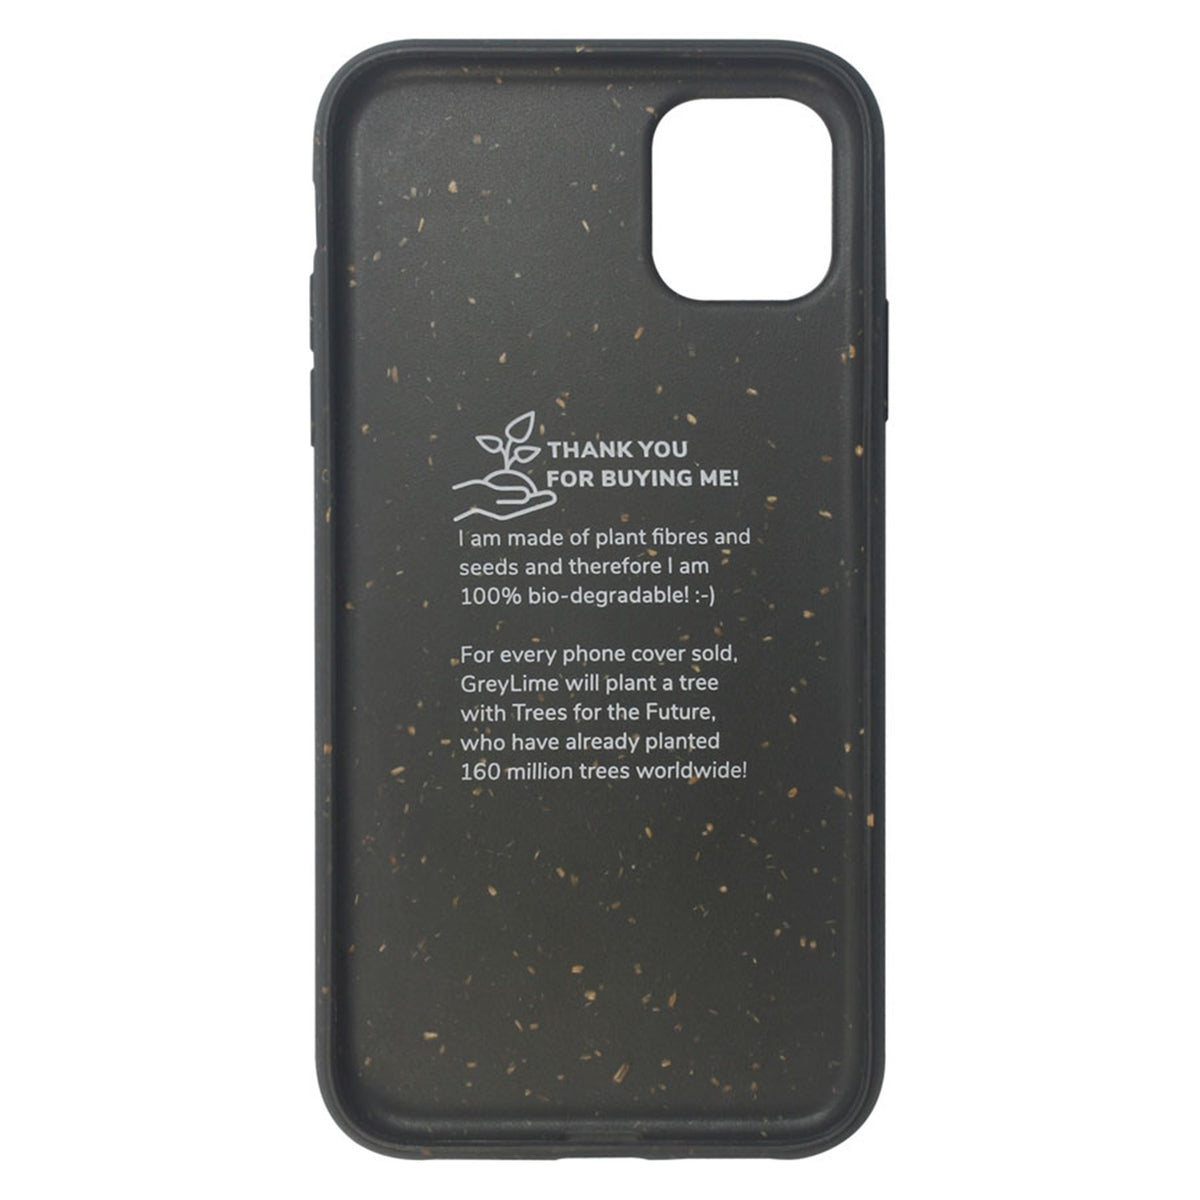 COIP1109 Greylime Iphone 11 Biodegradable Cover Black 4